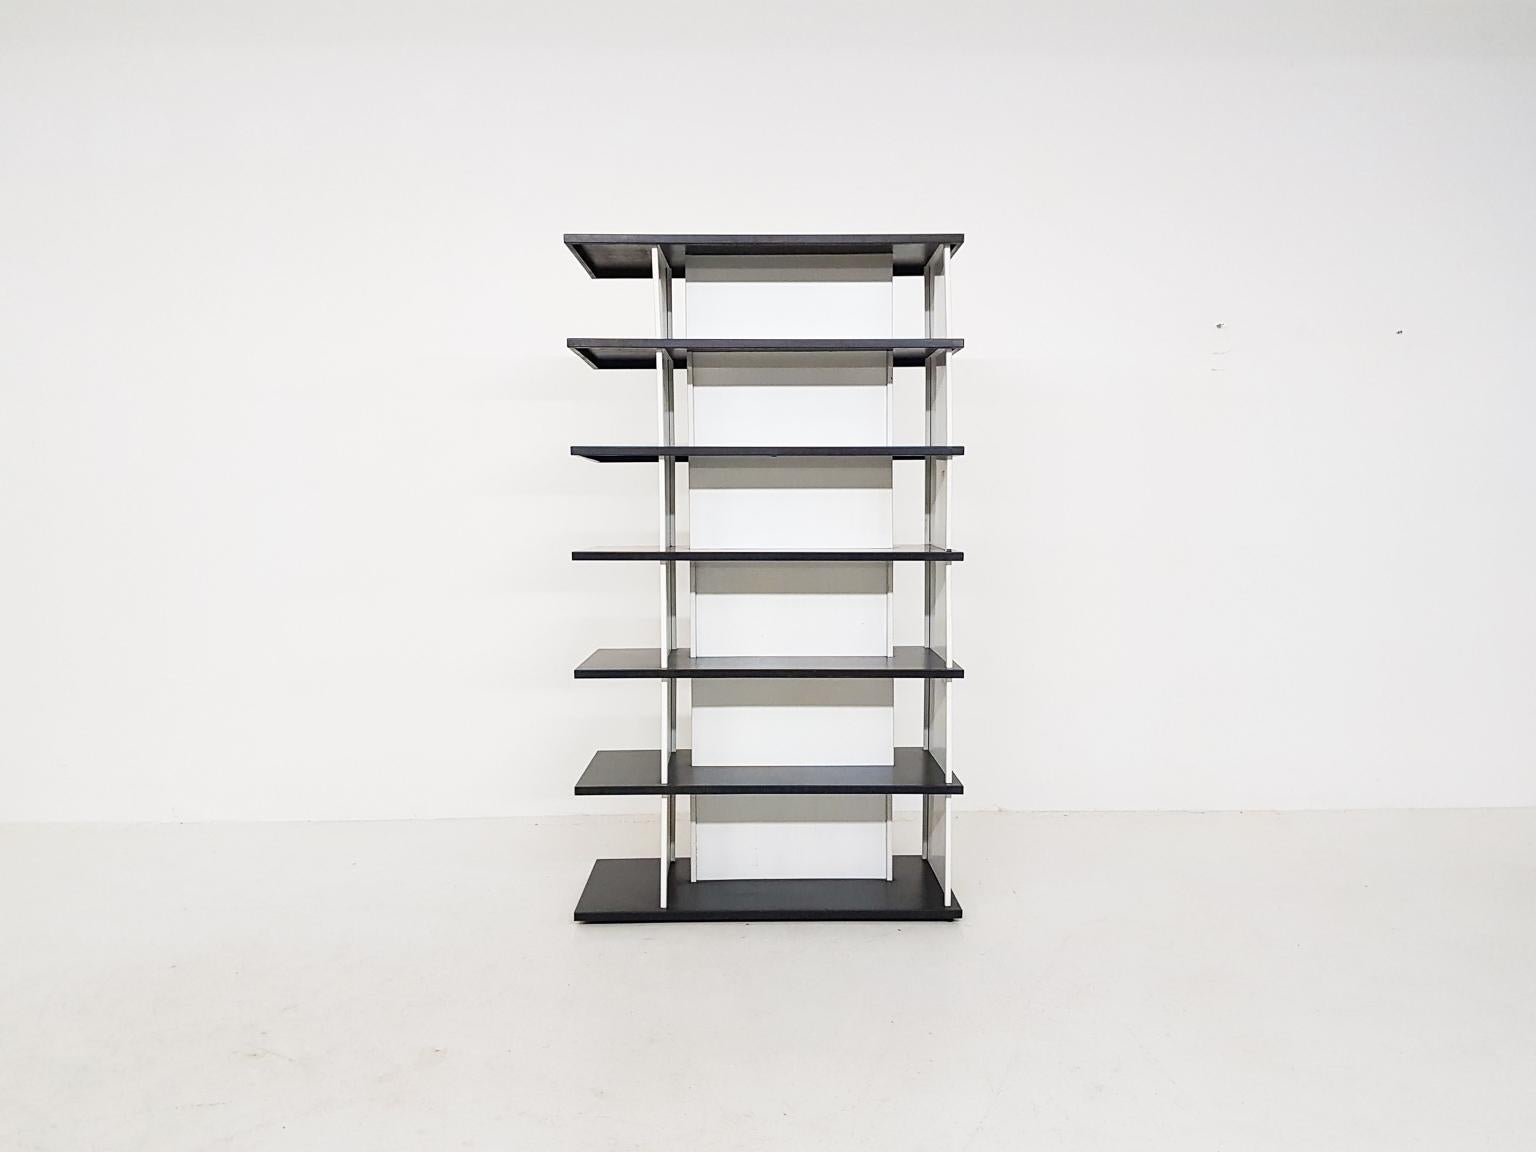 Dutch minimalistic metal room divider or bookcase by Wim Rietveld, the son of Gerrtit Rietveld. It was designed for “De Bijenkorf” the Netherlands in the 1960s and was inspired by a model designed by Gerrit Rietveld.

This bookcase or cabinet is a